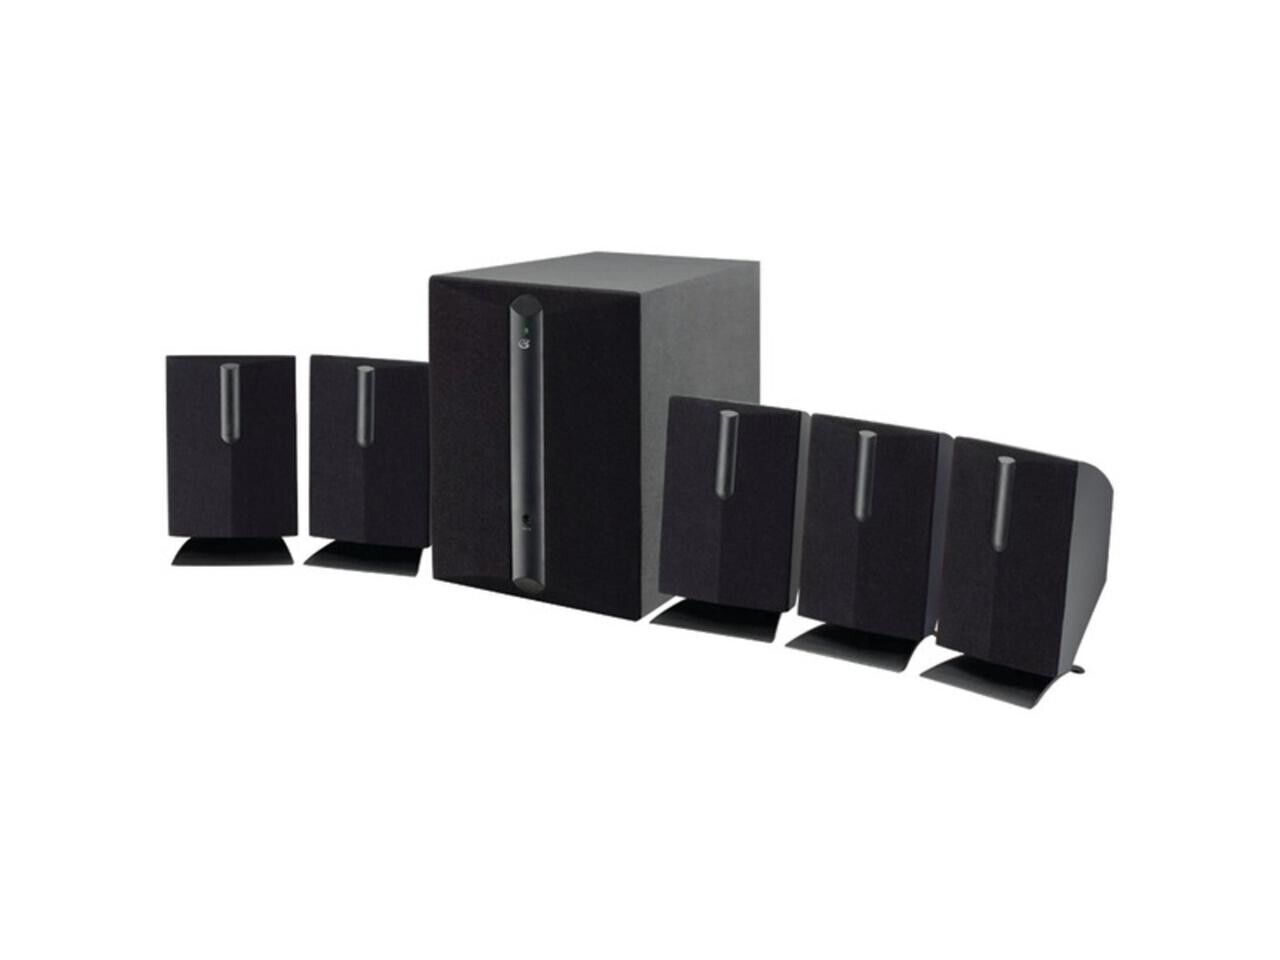 GPX HT050B 5.1 Channel Powered Speaker System with Subwoofer - Black